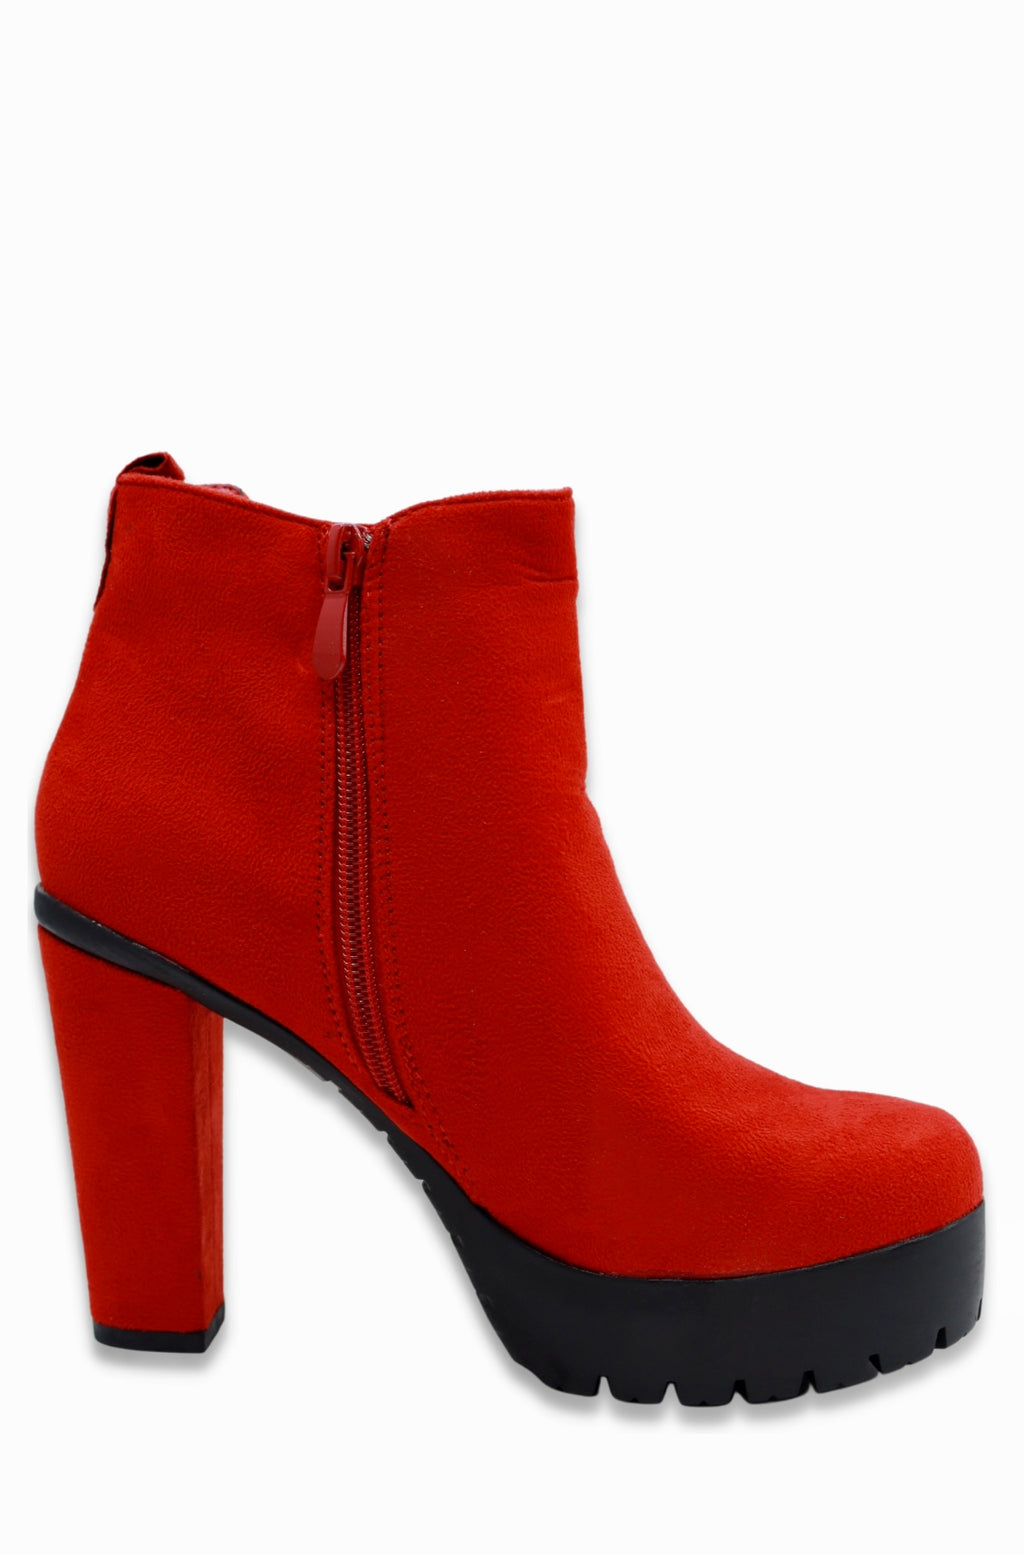 Women’s Suedette Ankle Boots (Red)